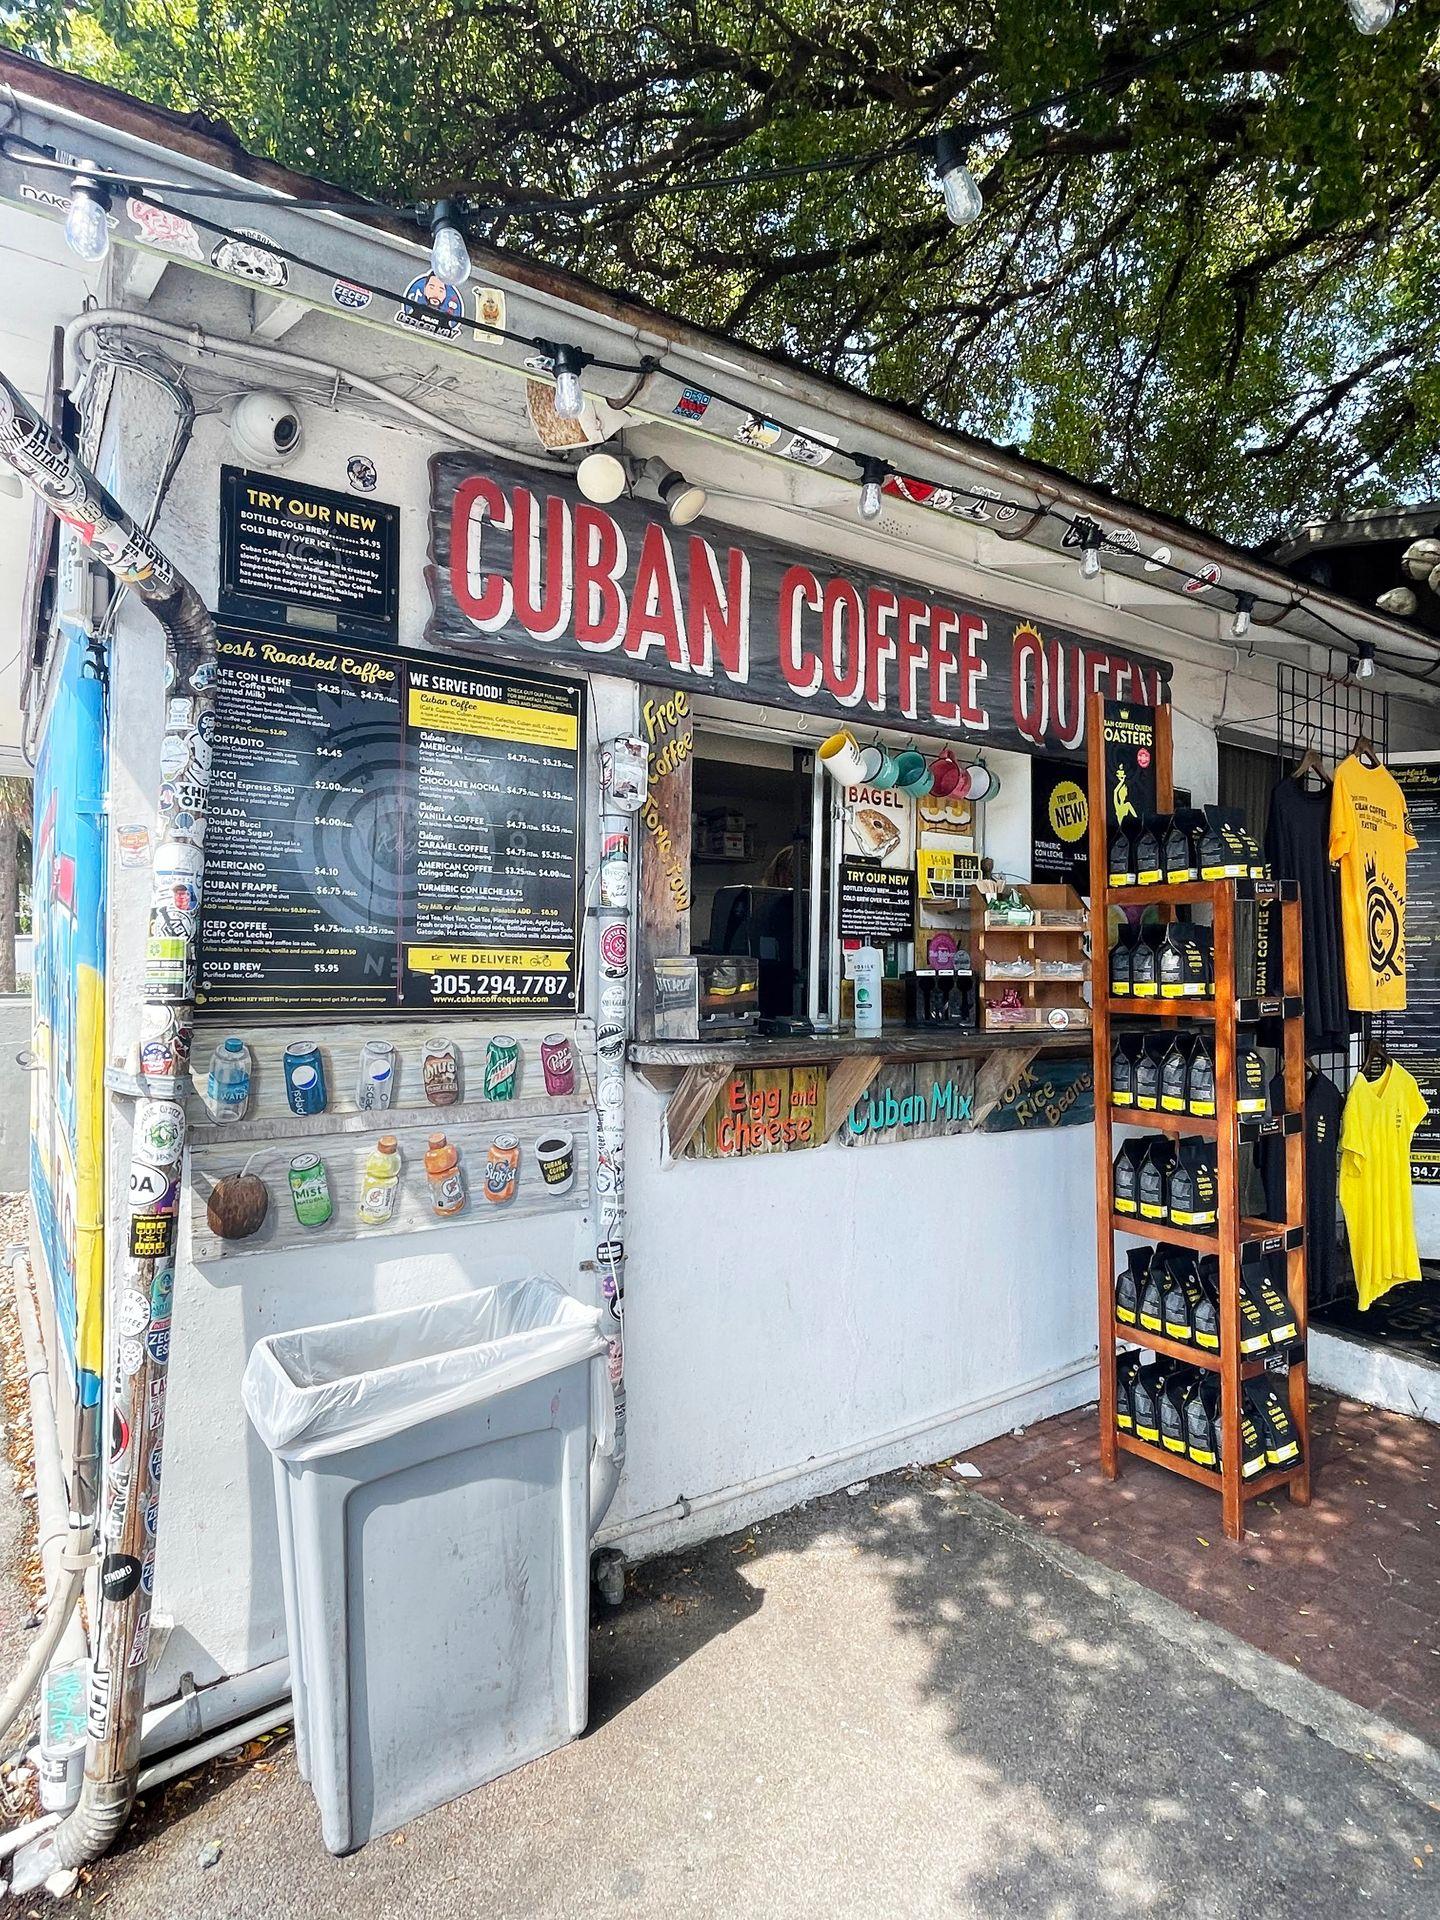 The order window at Cuban Coffee Queen. There is a menu on the left side of the window and ground coffee on the right